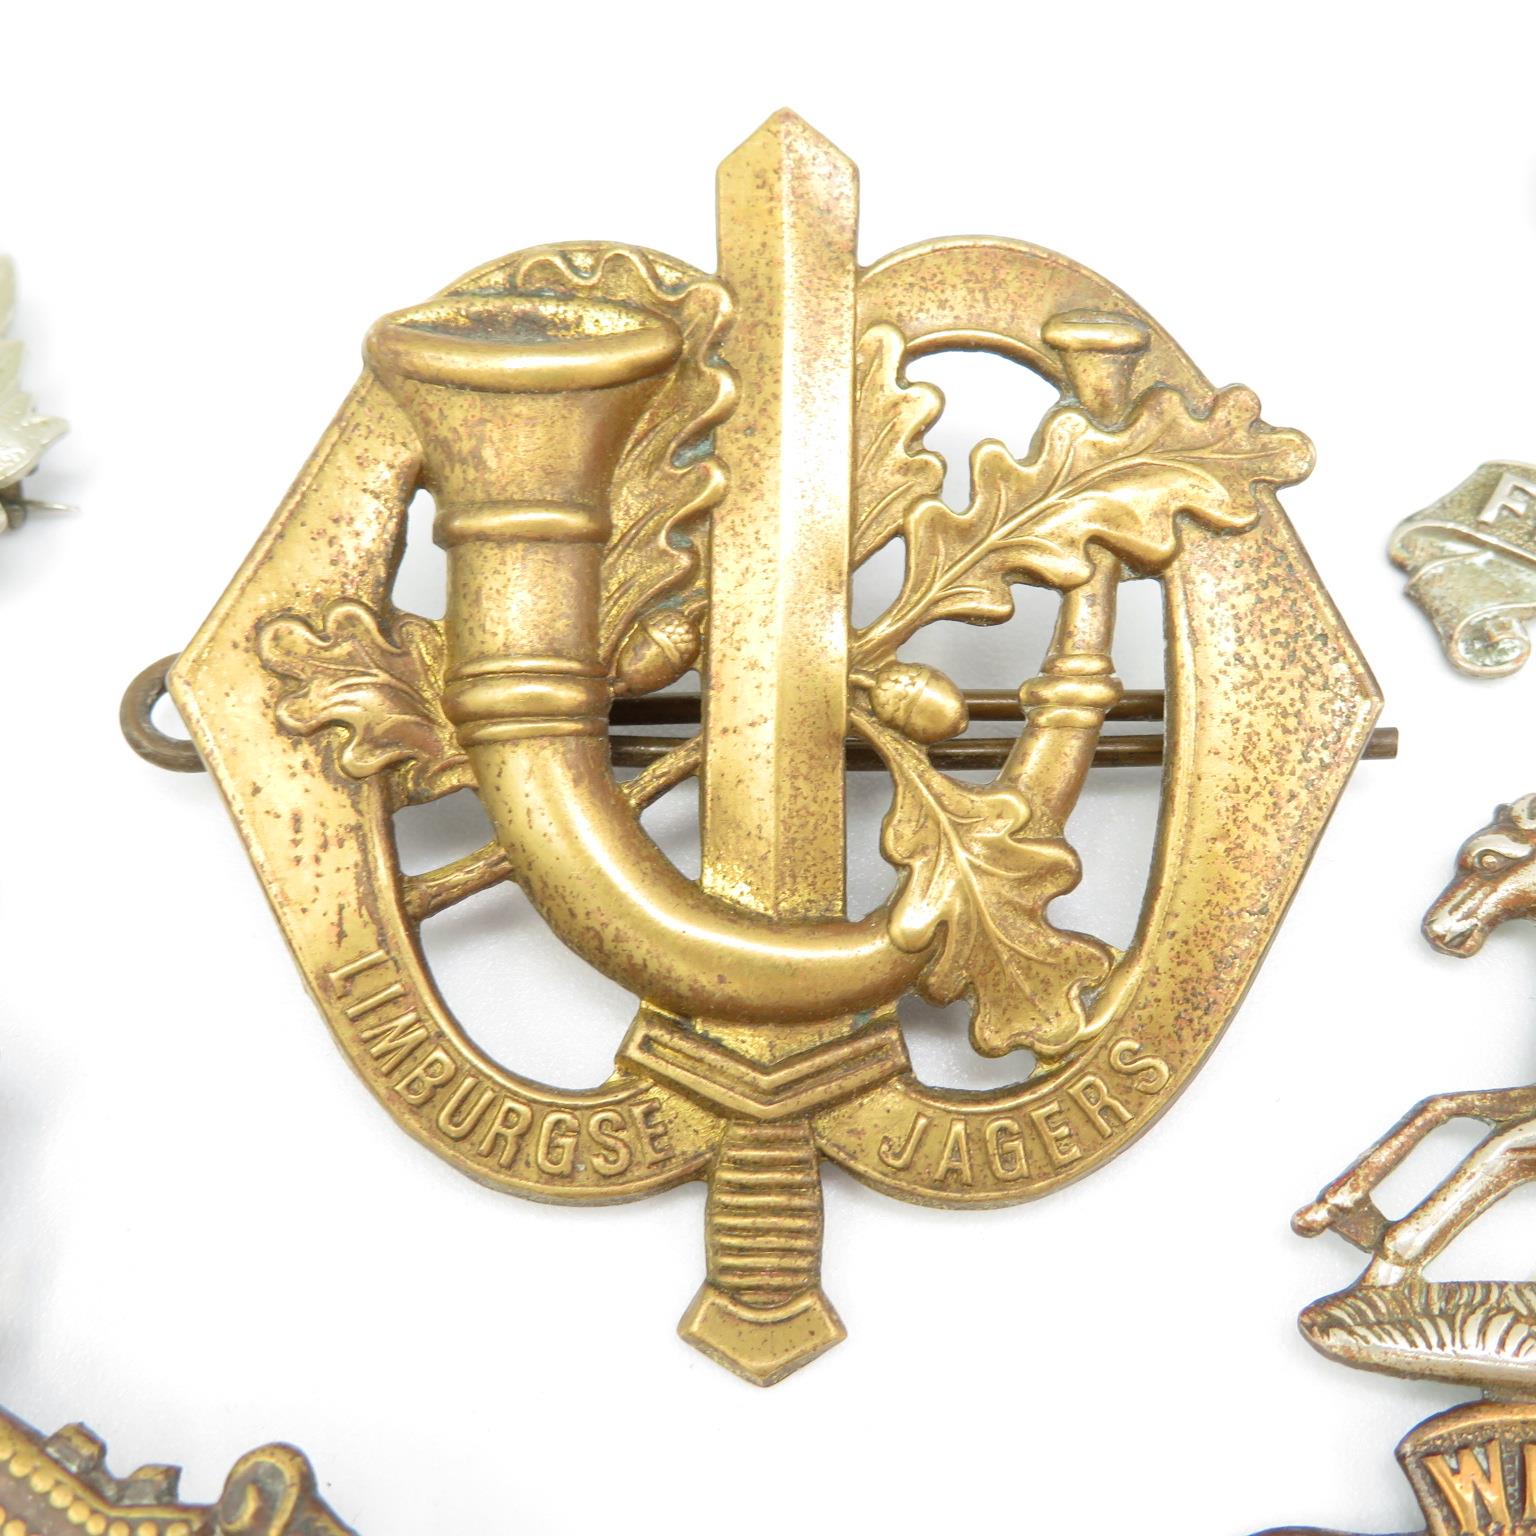 18x Military cap badges including Royal Scots Fusiliers and Lancers etc. - - Image 3 of 19